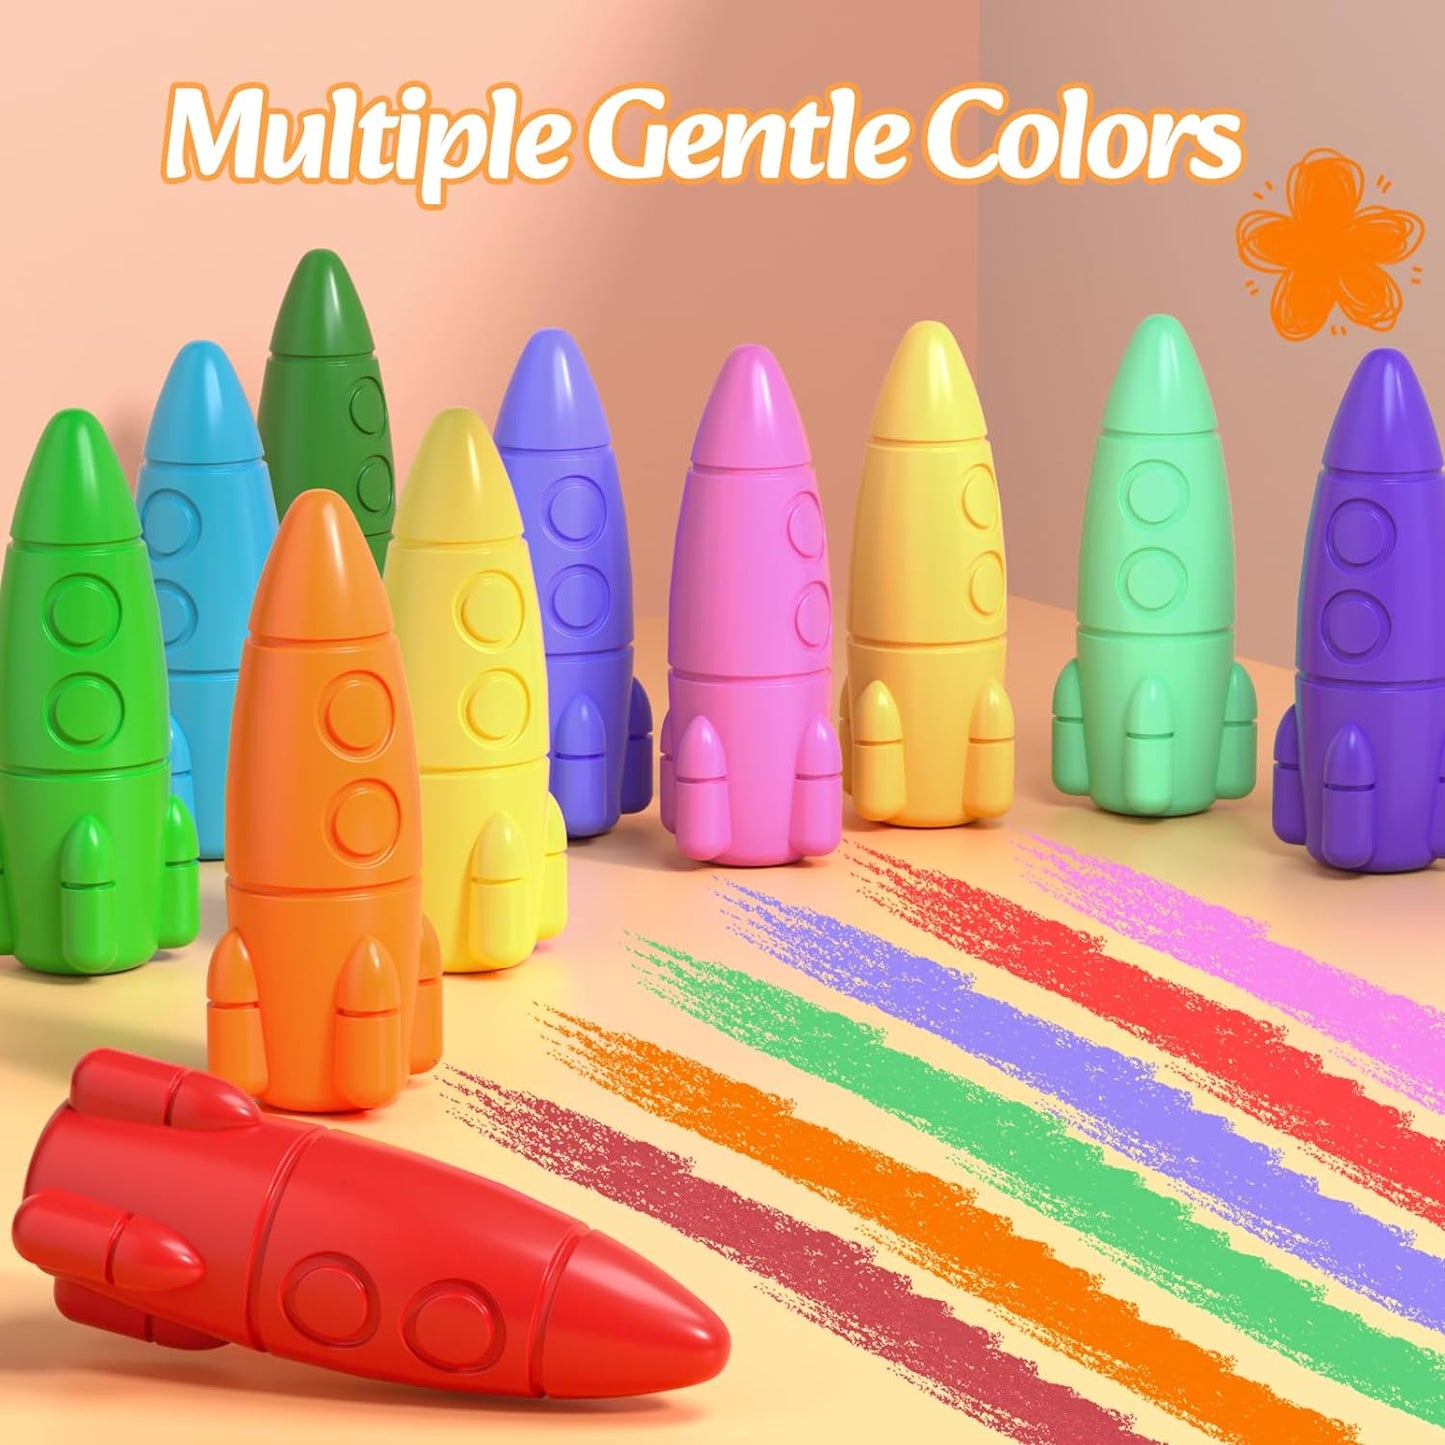 24 Rocket Crayons,Non Toxic Washable Toddler Crayons Gifts,Rocket Crayons with Easy-To-Hold for Toddlers, Crayons for Kids Art&School Supplies,Toddlers